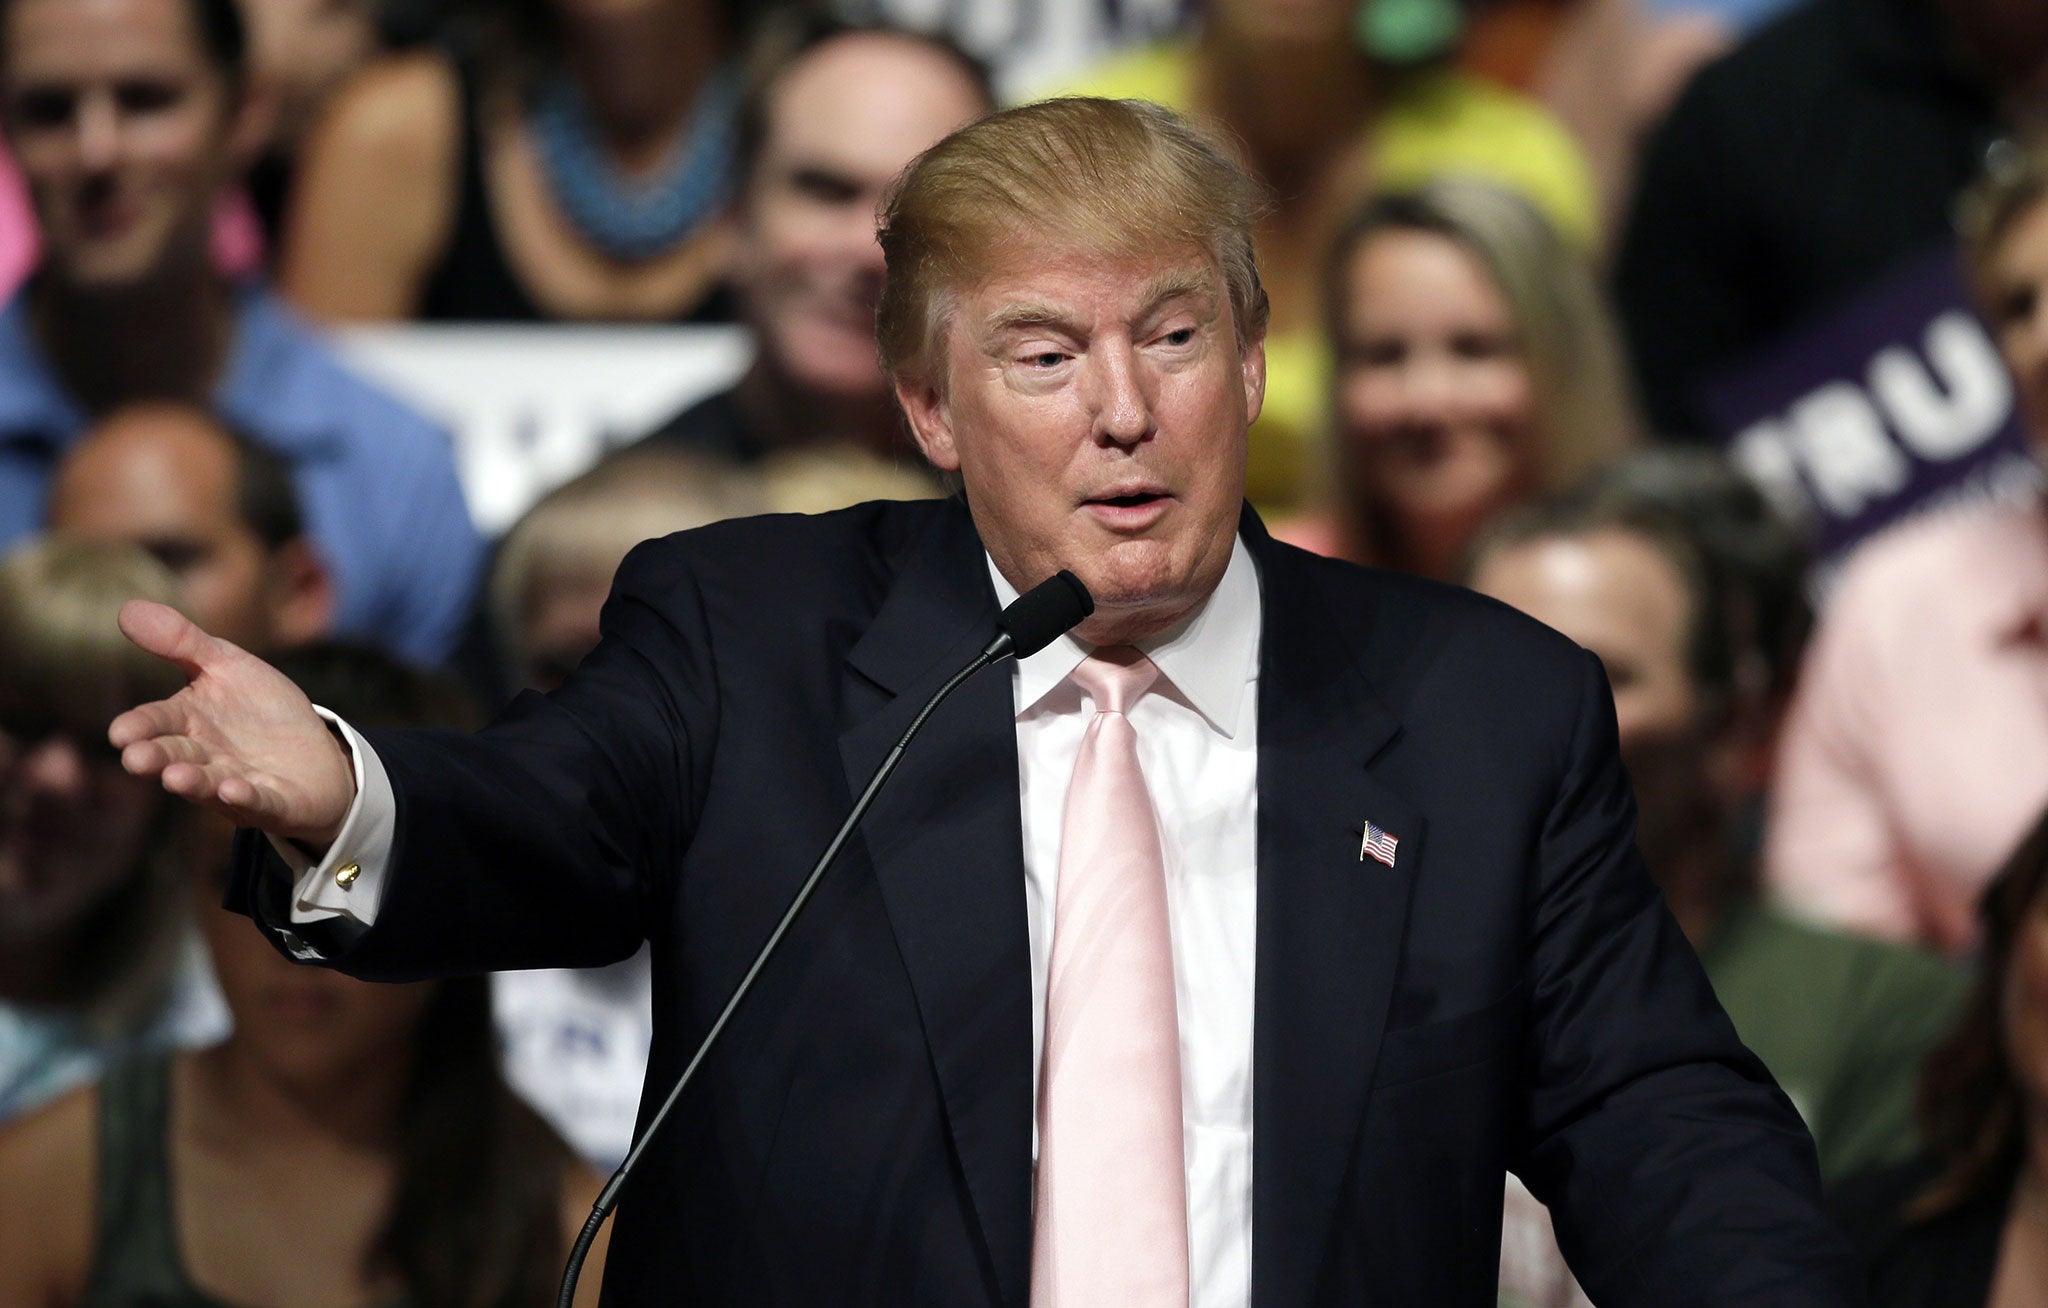 Donald Trump is going head-to-head with his Republican rivals